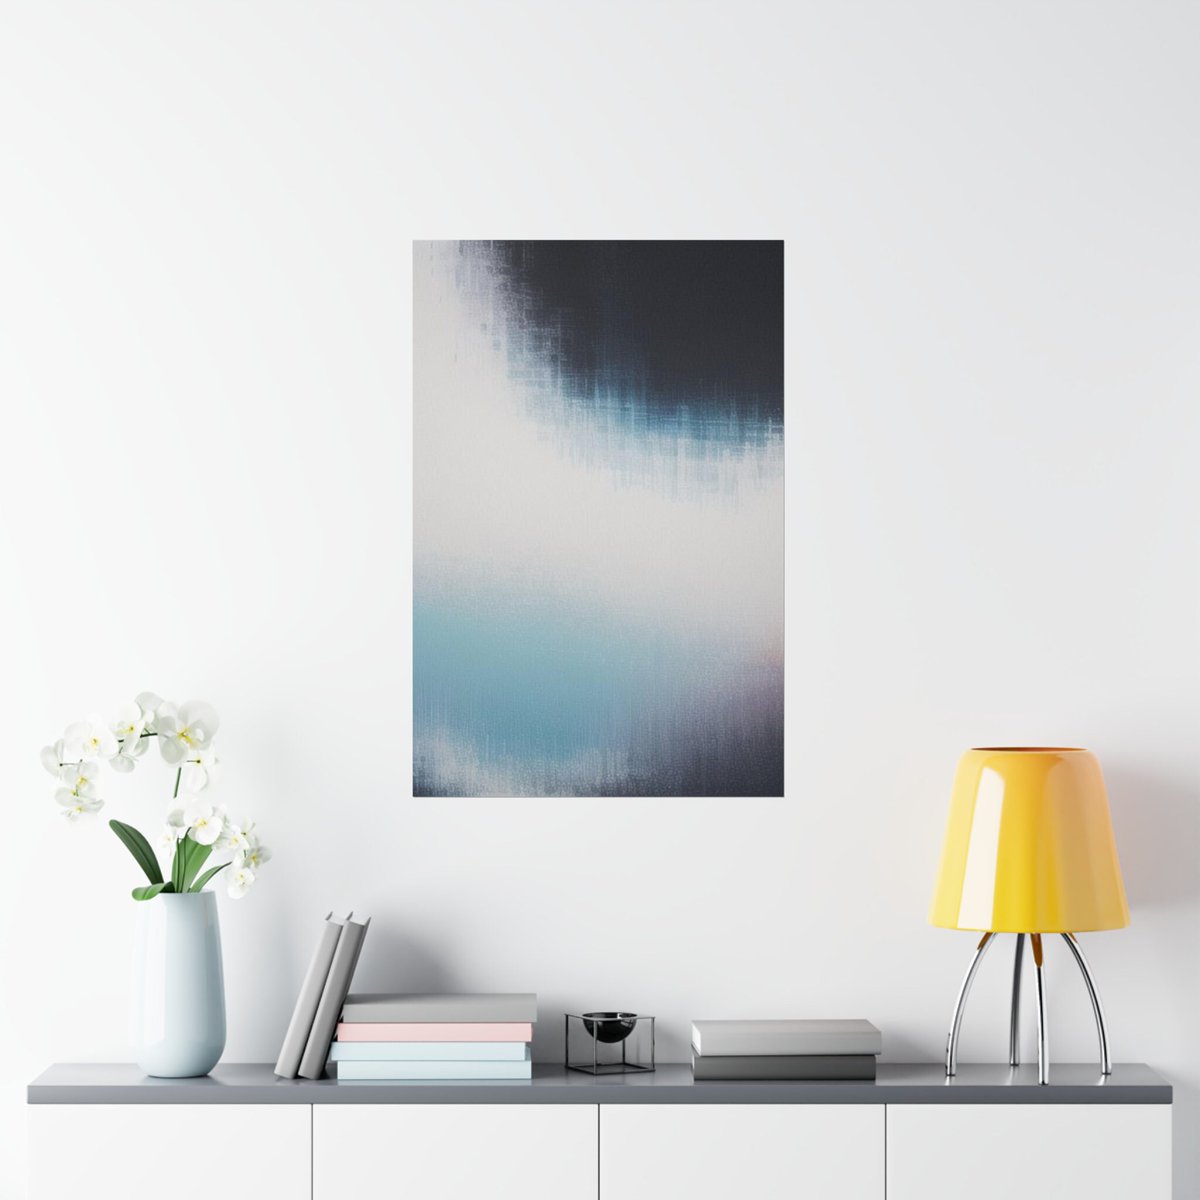 Excited to share the latest addition to my #etsy shop: Premium Matte Vertical Posters etsy.me/3qimthK #printingprintmaking #craftycolorationsco